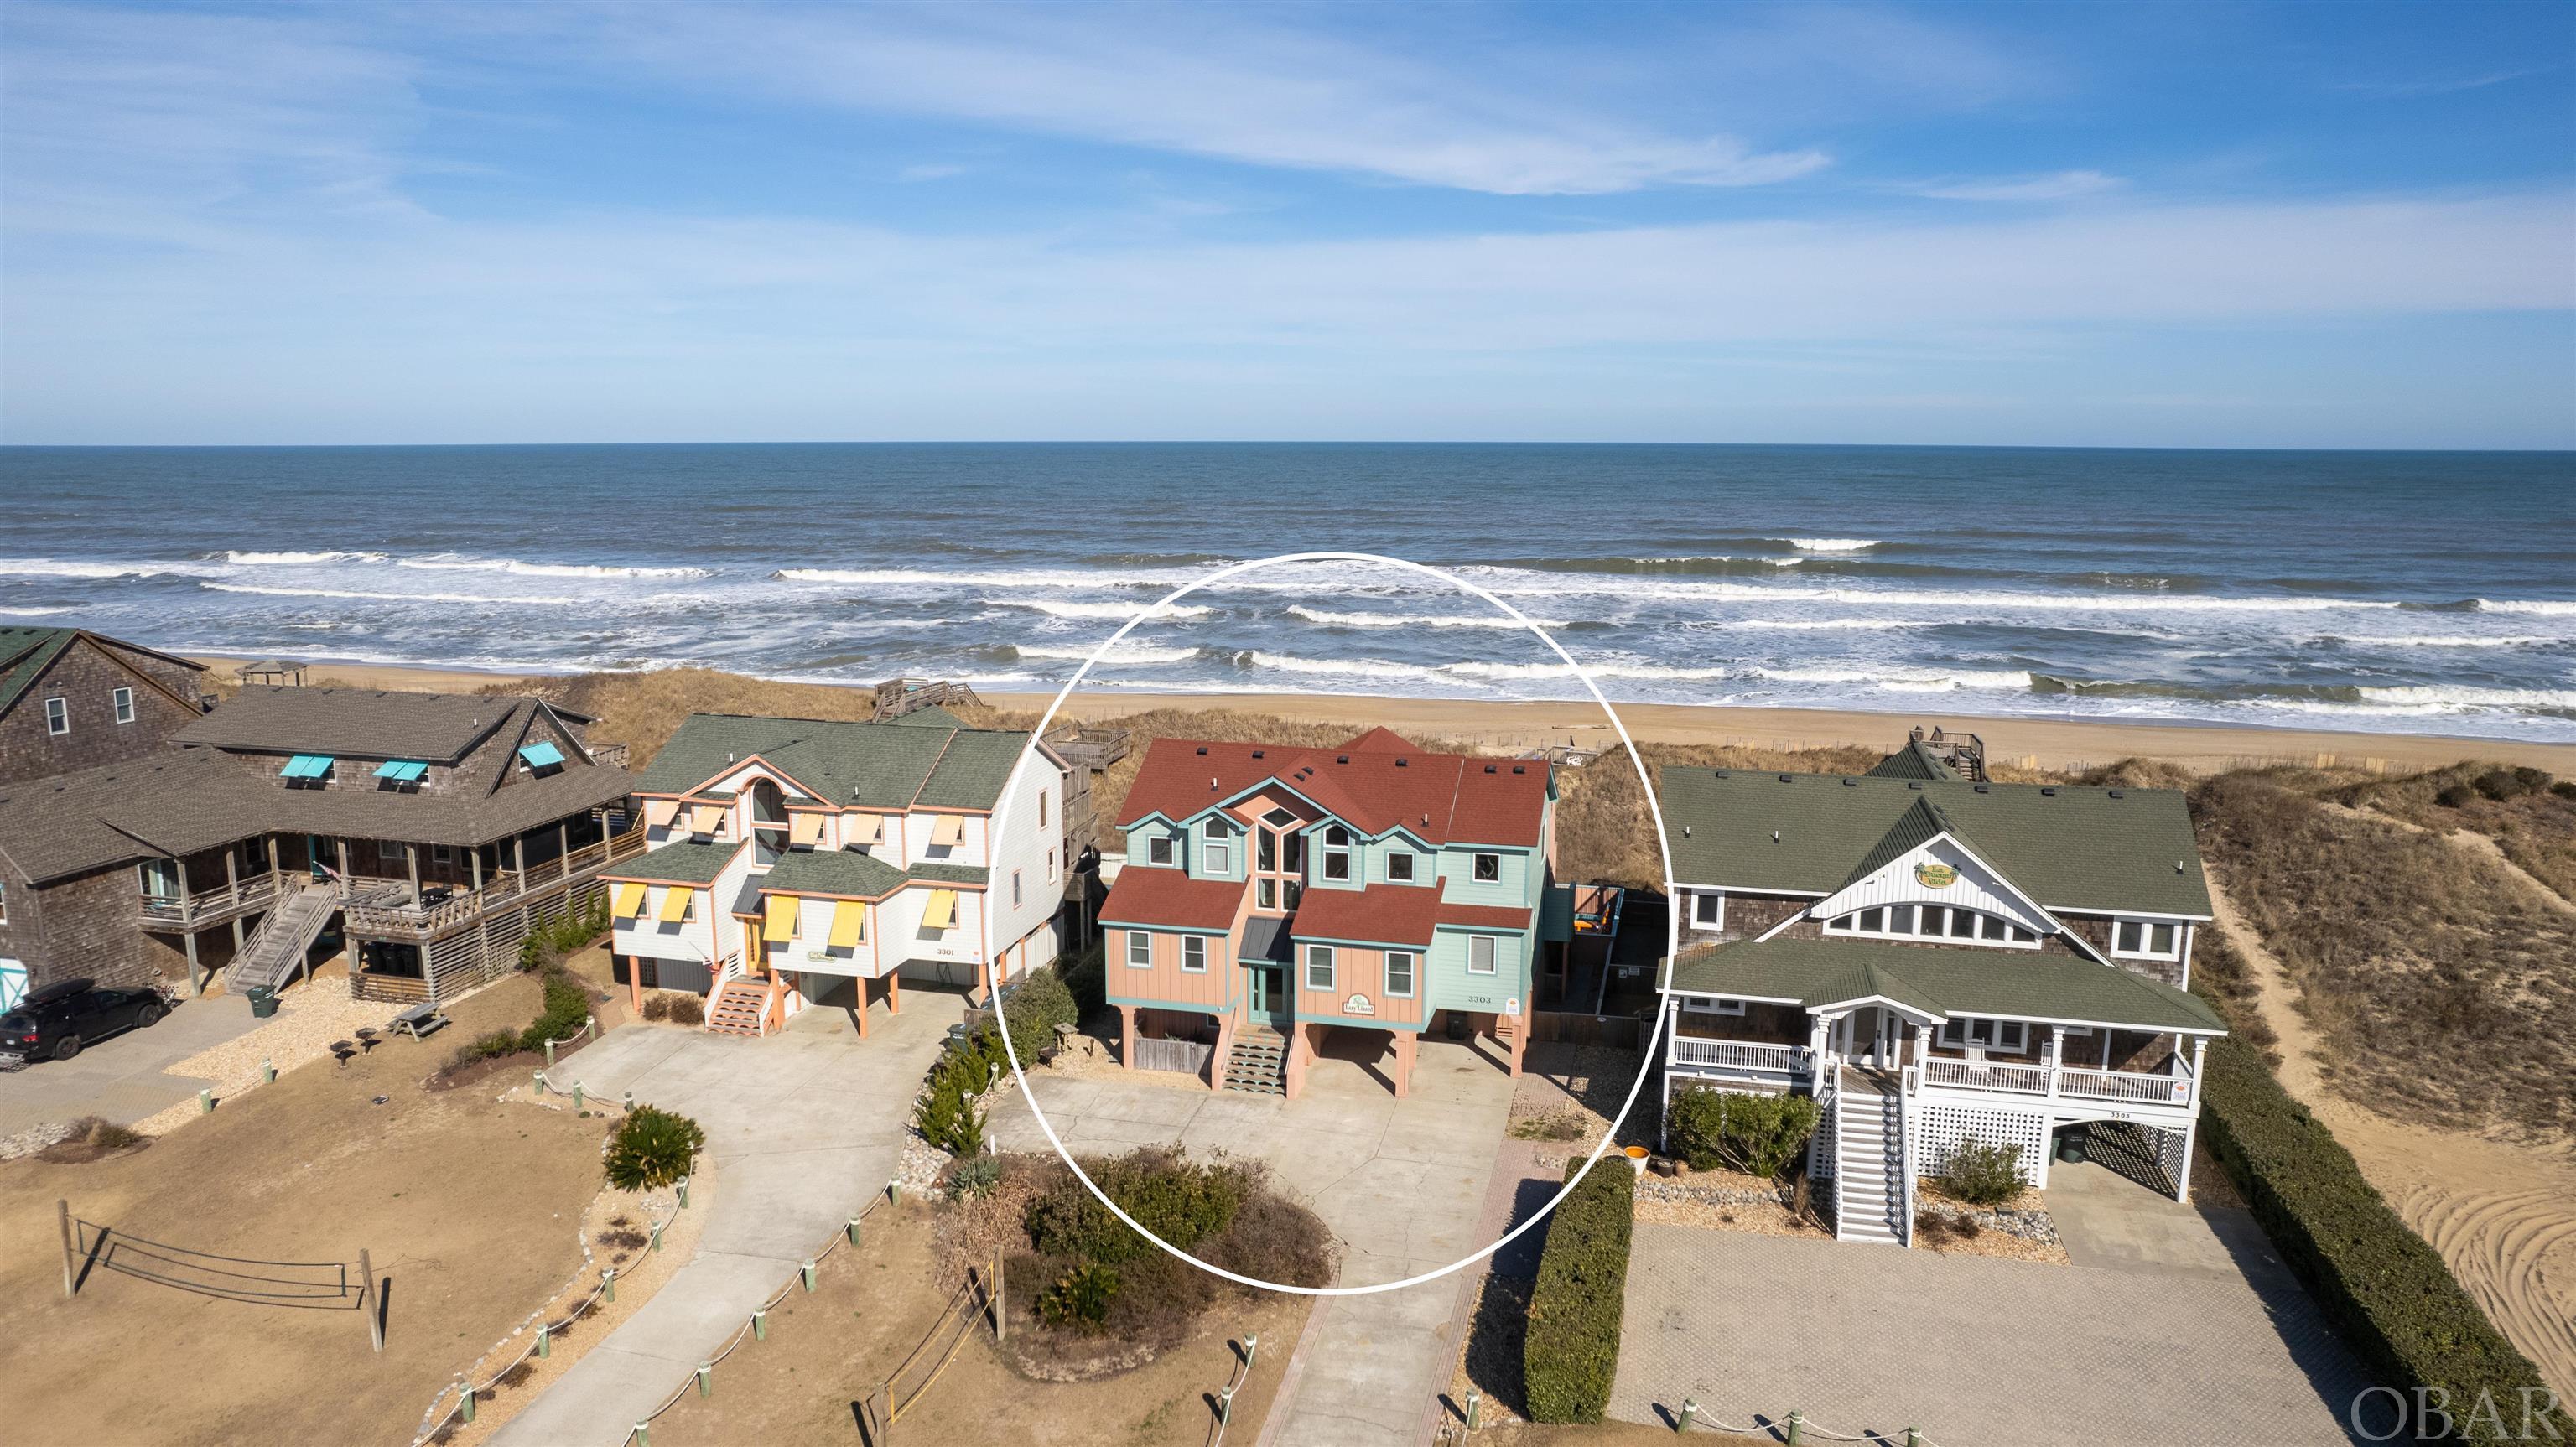 RENOVATED with incredible Ocean Views.  Boasting a private beach access and dune top deck, heated 14x24 pool, 6 person hot tub, 6 primary bedrooms w/ en suite baths (8 per tax records, but actually 9 bedrooms total!), new outdoor fire pit, volleyball, game room, 11 smart tv's, and endless ocean views from almost every room, it is no wonder renters love the 'Lazy Lizard'!  A 9.3% Gross Rental Return based on OWNER gross rentals (not advertised rentals), this is a turn key Oceanfront investment opportunity!  Recent Upgrades include new LVT flooring, new furniture and decor, new interior paint, new pool liner, and so much more ... see complete list in associated docs.  The top level is a show stopper with a wall of Ocean View windows capturing waterfront vistas as far as the eye can see!  Entertaining is a breeze in this grande space with shiplap wall accents, tons of seating, and a gas fireplace.  You will also find a King primary bedroom and powder room on this level.  The mid level features 5 additional King bedrooms all with private en-suite baths along with a twin bedroom (BR #7), all decorated with a coastal feel including local art!  The ground level offers a large rec room with pool table, foosball, as well as a King bedroom (BR #8), bunk room (BR #9), full hallway bathroom, and access to the private pool and oceanside outdoor area.  LOCATION, LOCATION, LOCATION ... MP 11.5 and close to several Outer Banks classics including Tortuga's Lie, Bonnett Street beach access, Dowdy Park, Lucky 12 Tavern, the Nags Head Pier, Surfin' Spoon, and Jockey's Ridge!